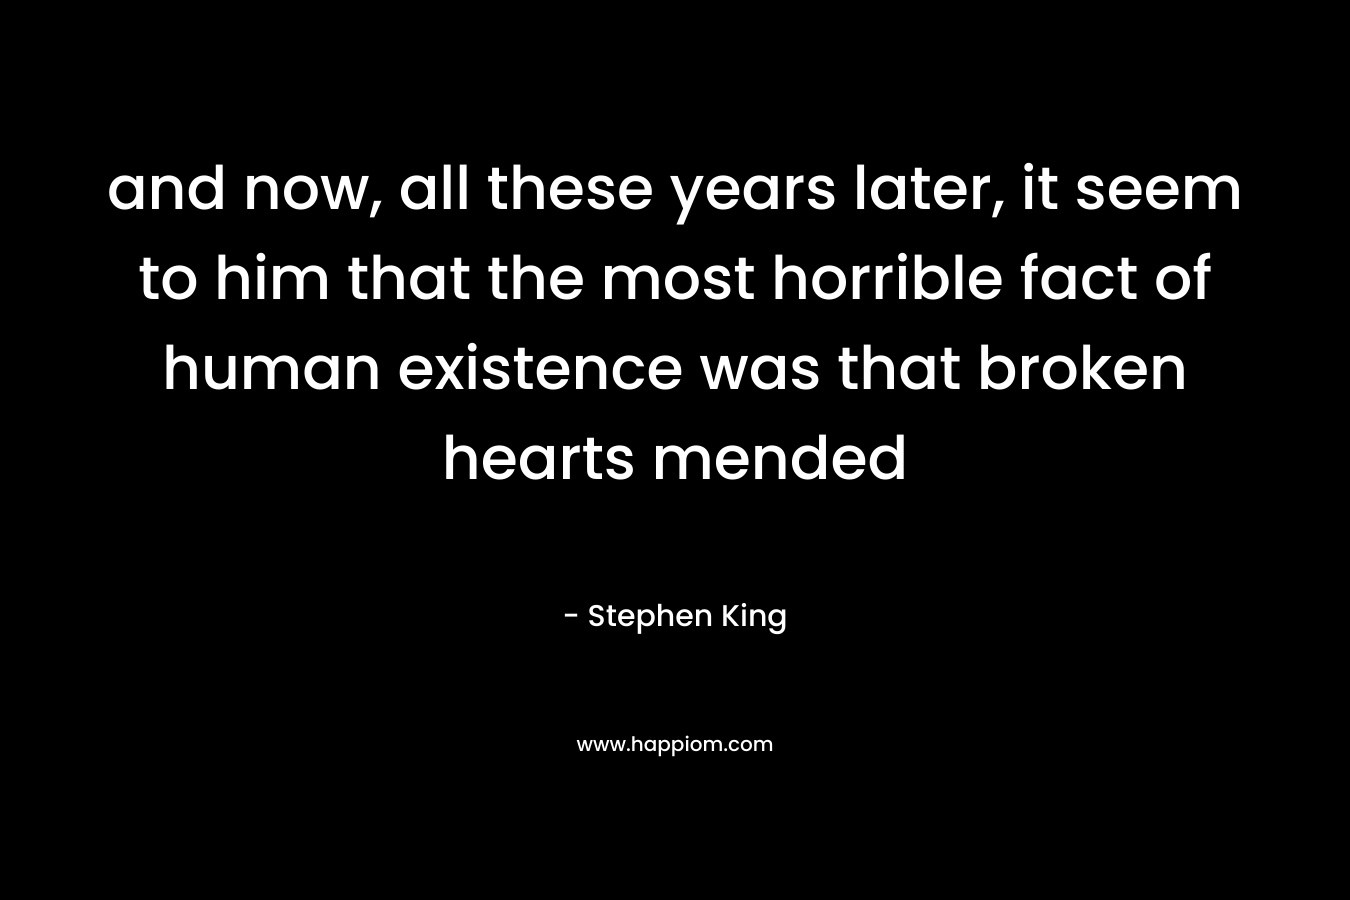 and now, all these years later, it seem to him that the most horrible fact of human existence was that broken hearts mended